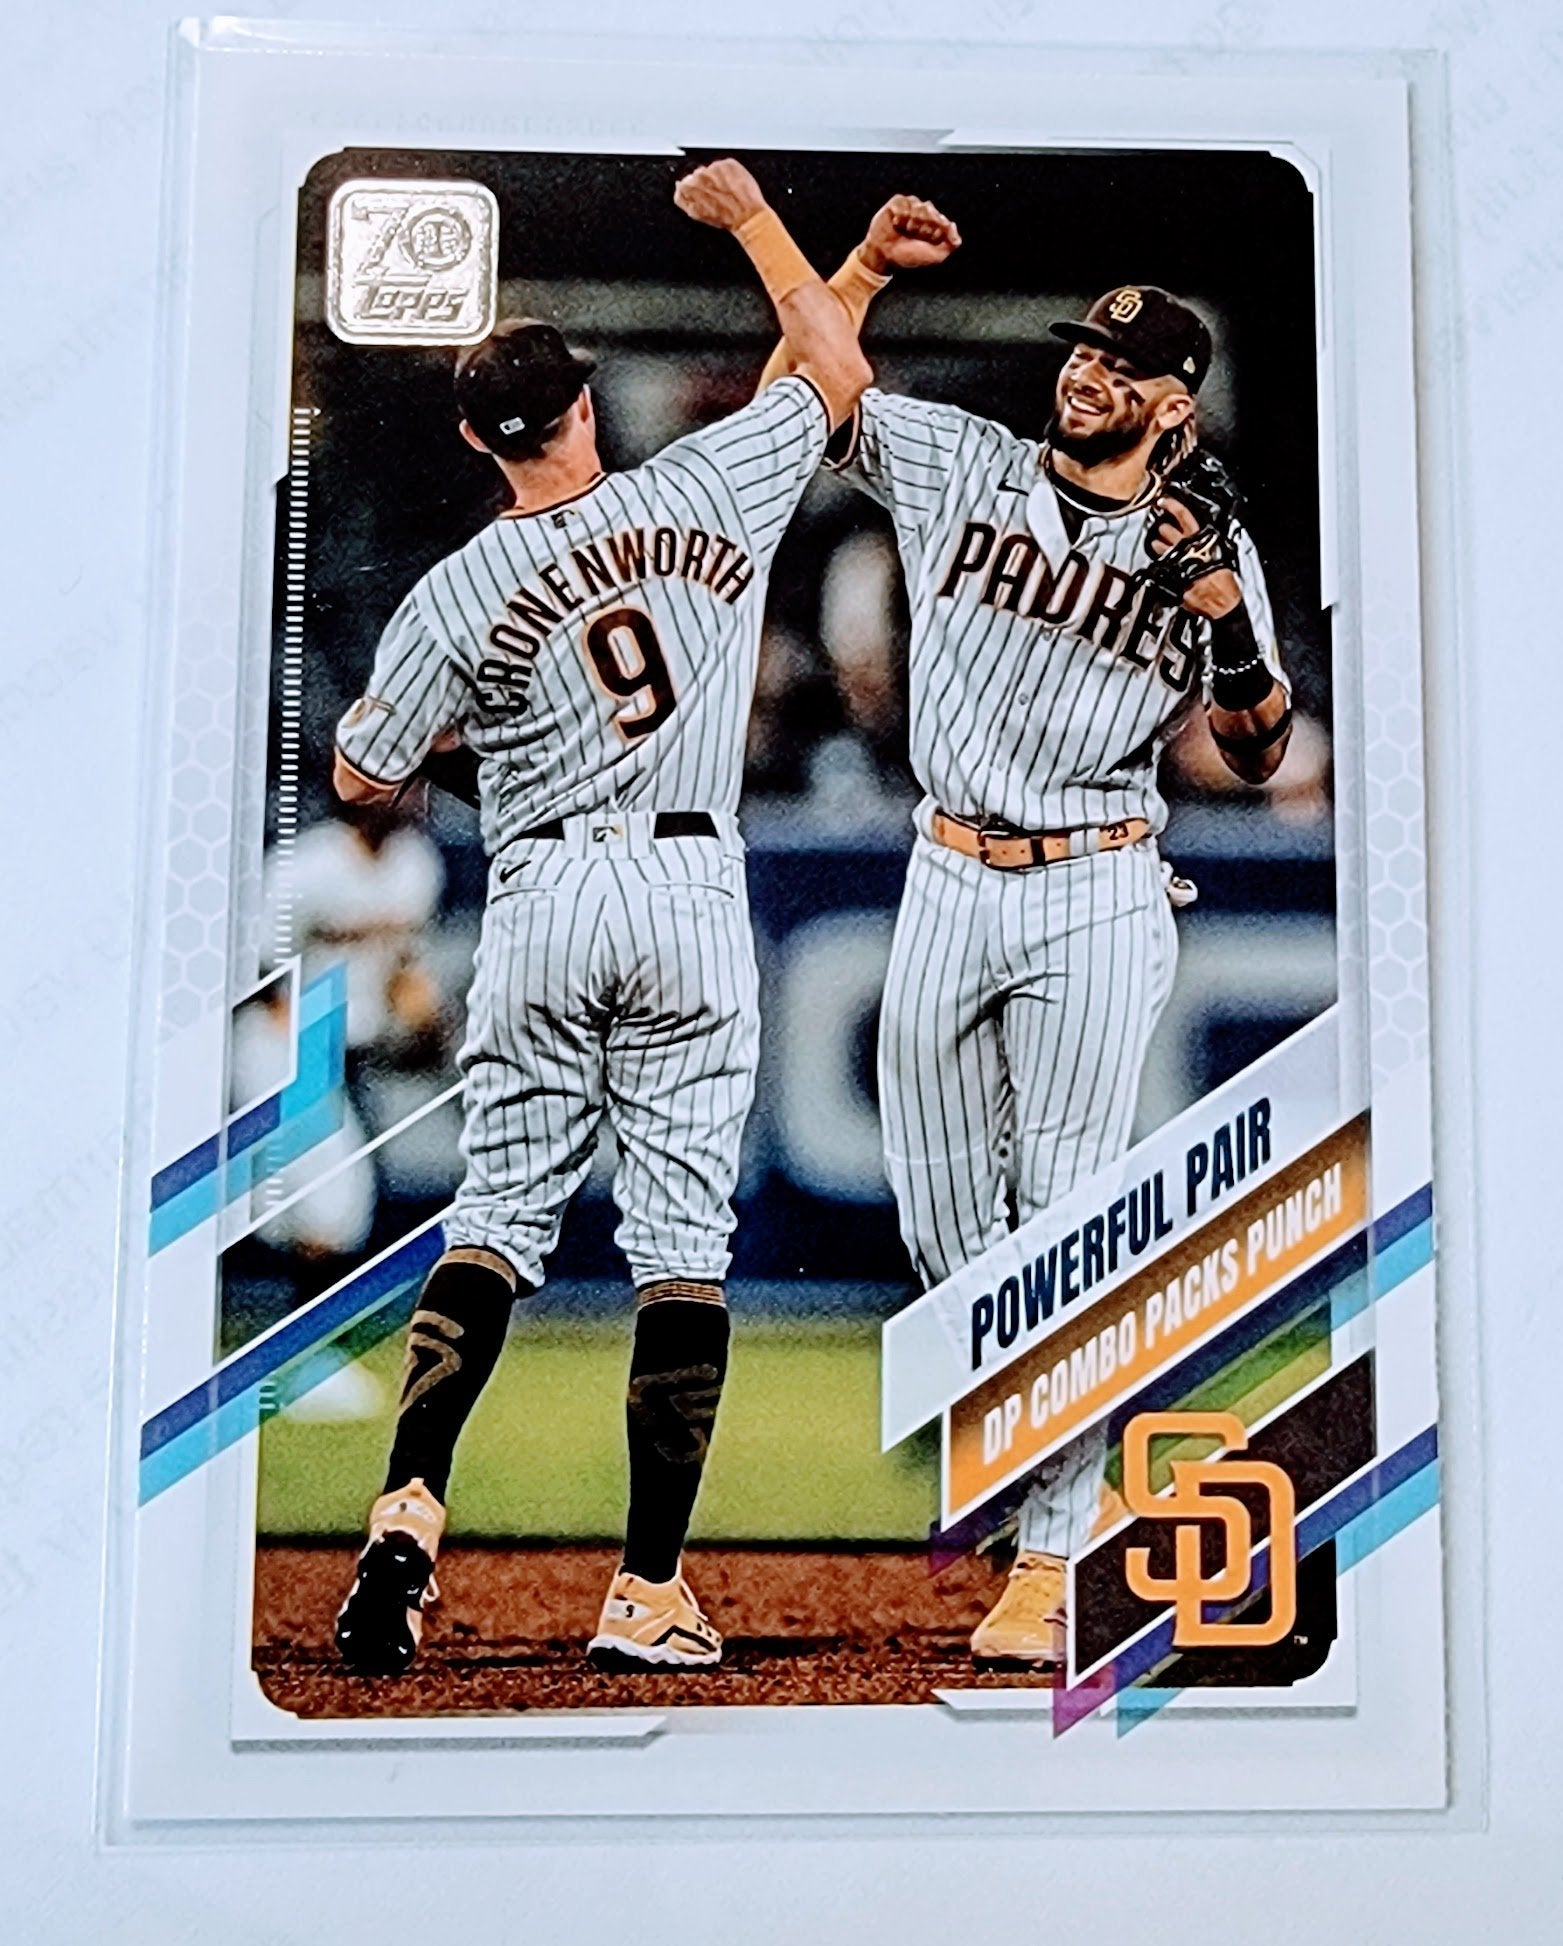 2021 Topps Powerful Pair DP Combo Tatis & Cronenworth Baseball Trading Card SMCB1 simple Xclusive Collectibles   